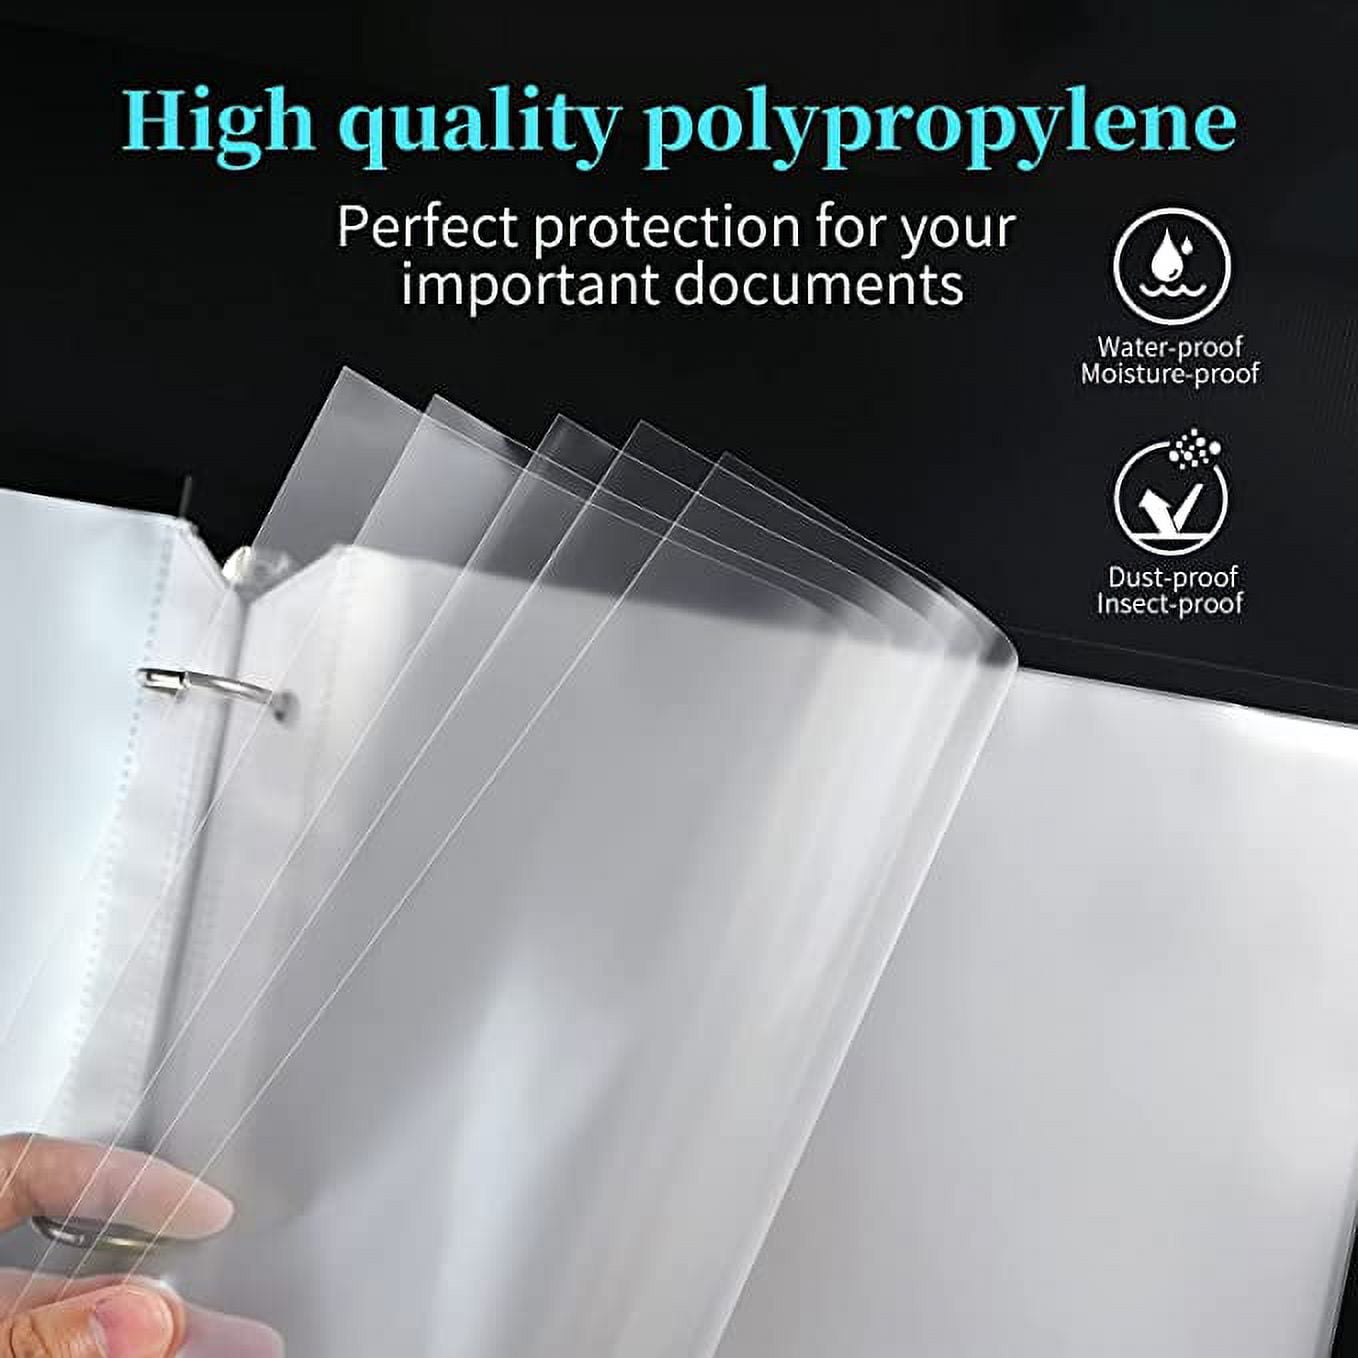 Sheet Protectors 8.5 X 11inch For 3 Ring Binder, Sheet Protectors Heavy  Duty Clear Page Protectors,plastic Sleeves,binder Sleeves Organizer,document  P